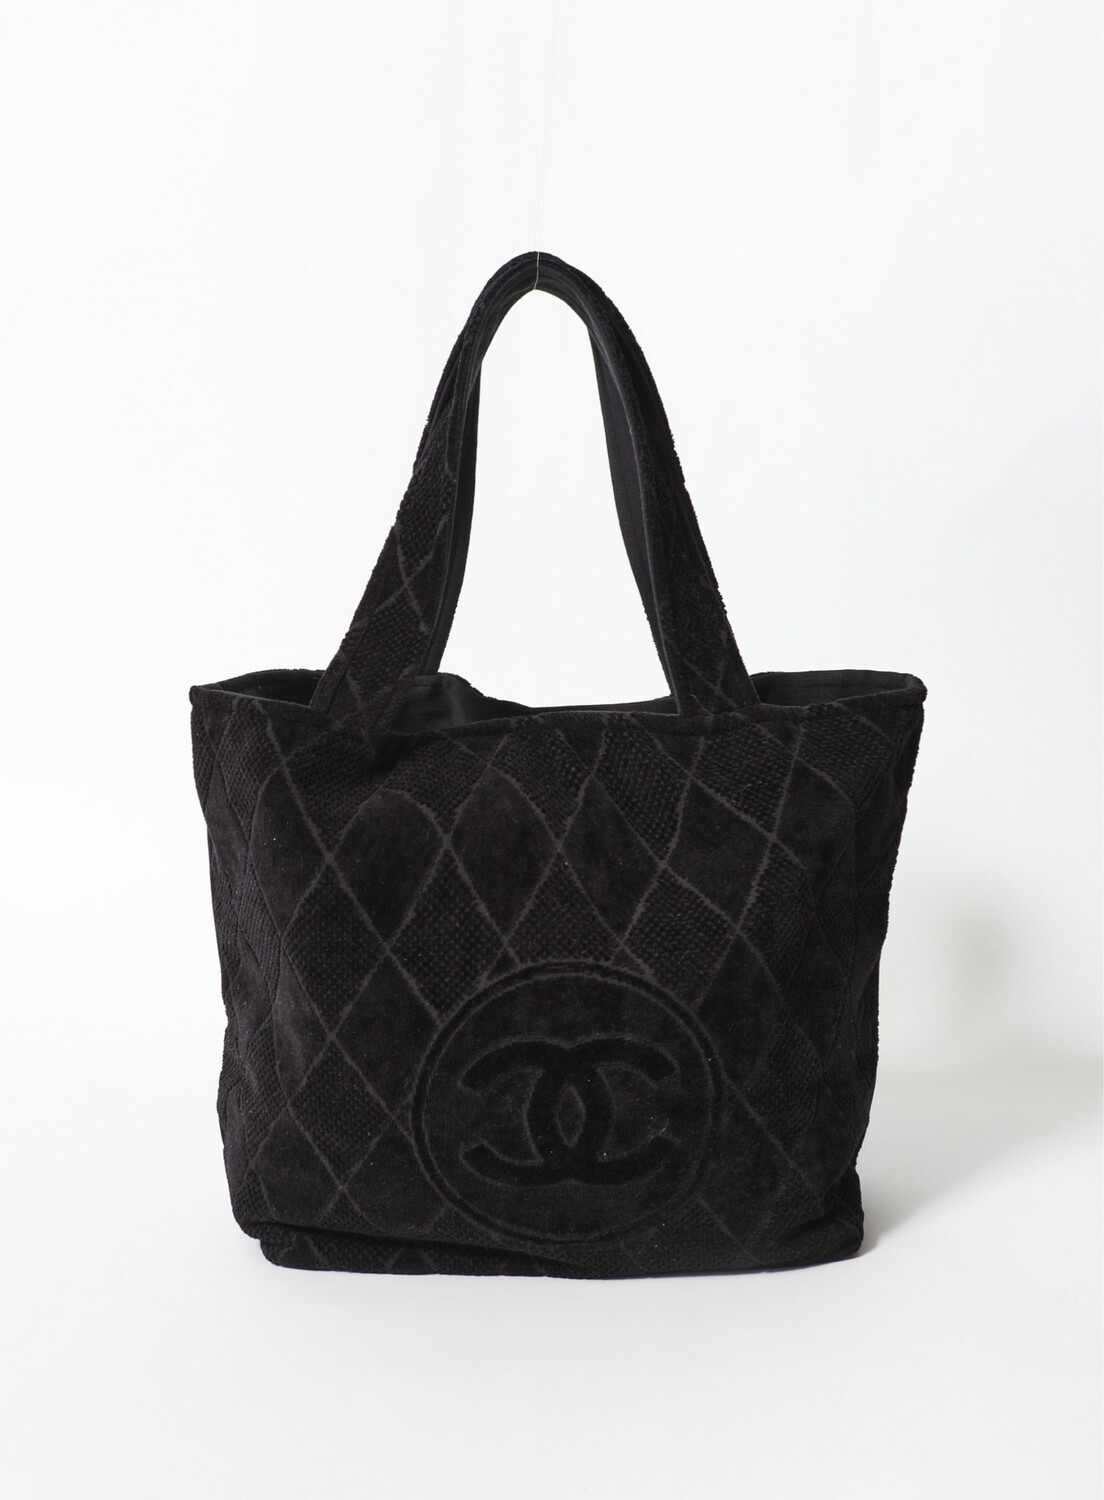 Chanel Towel Bag Black with Pouch and Towel, New MA001